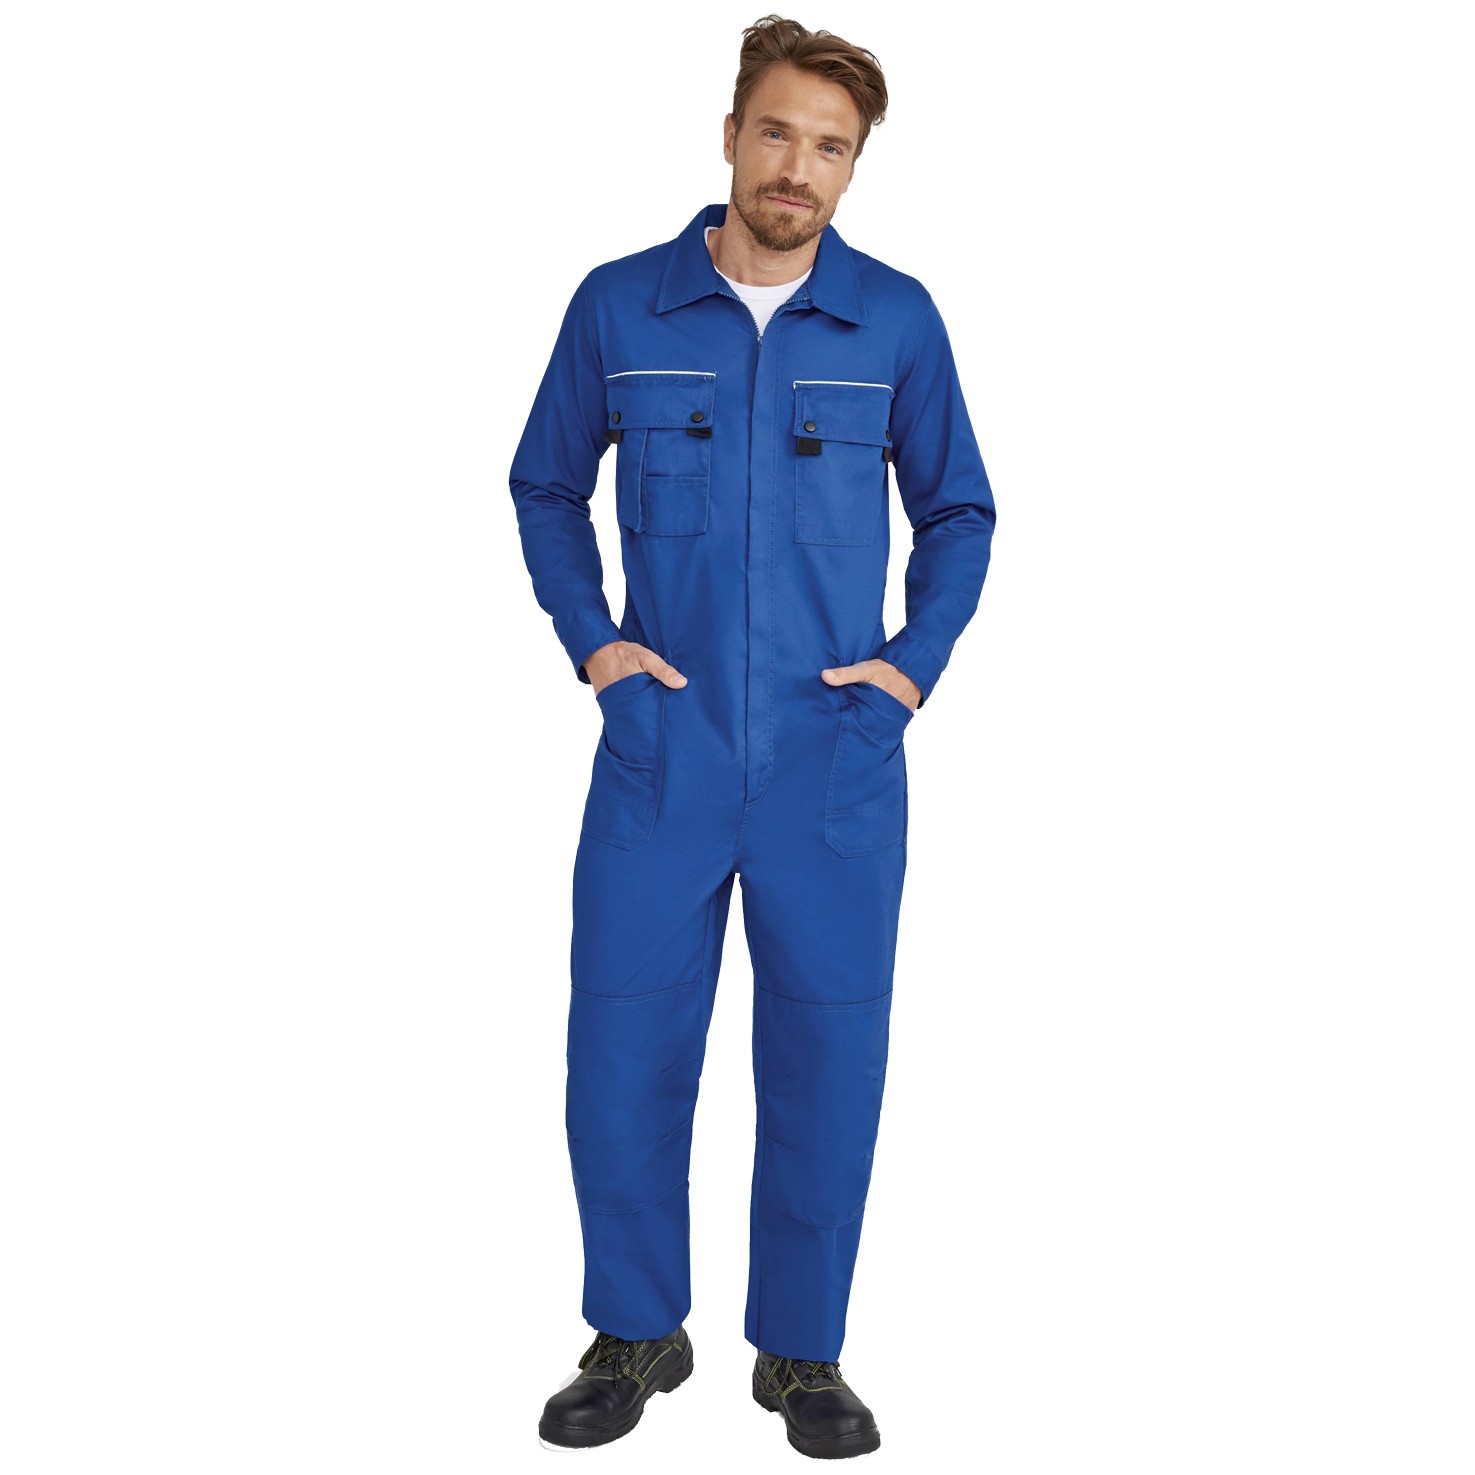 Overall Workwear Sol's Solstice Pro